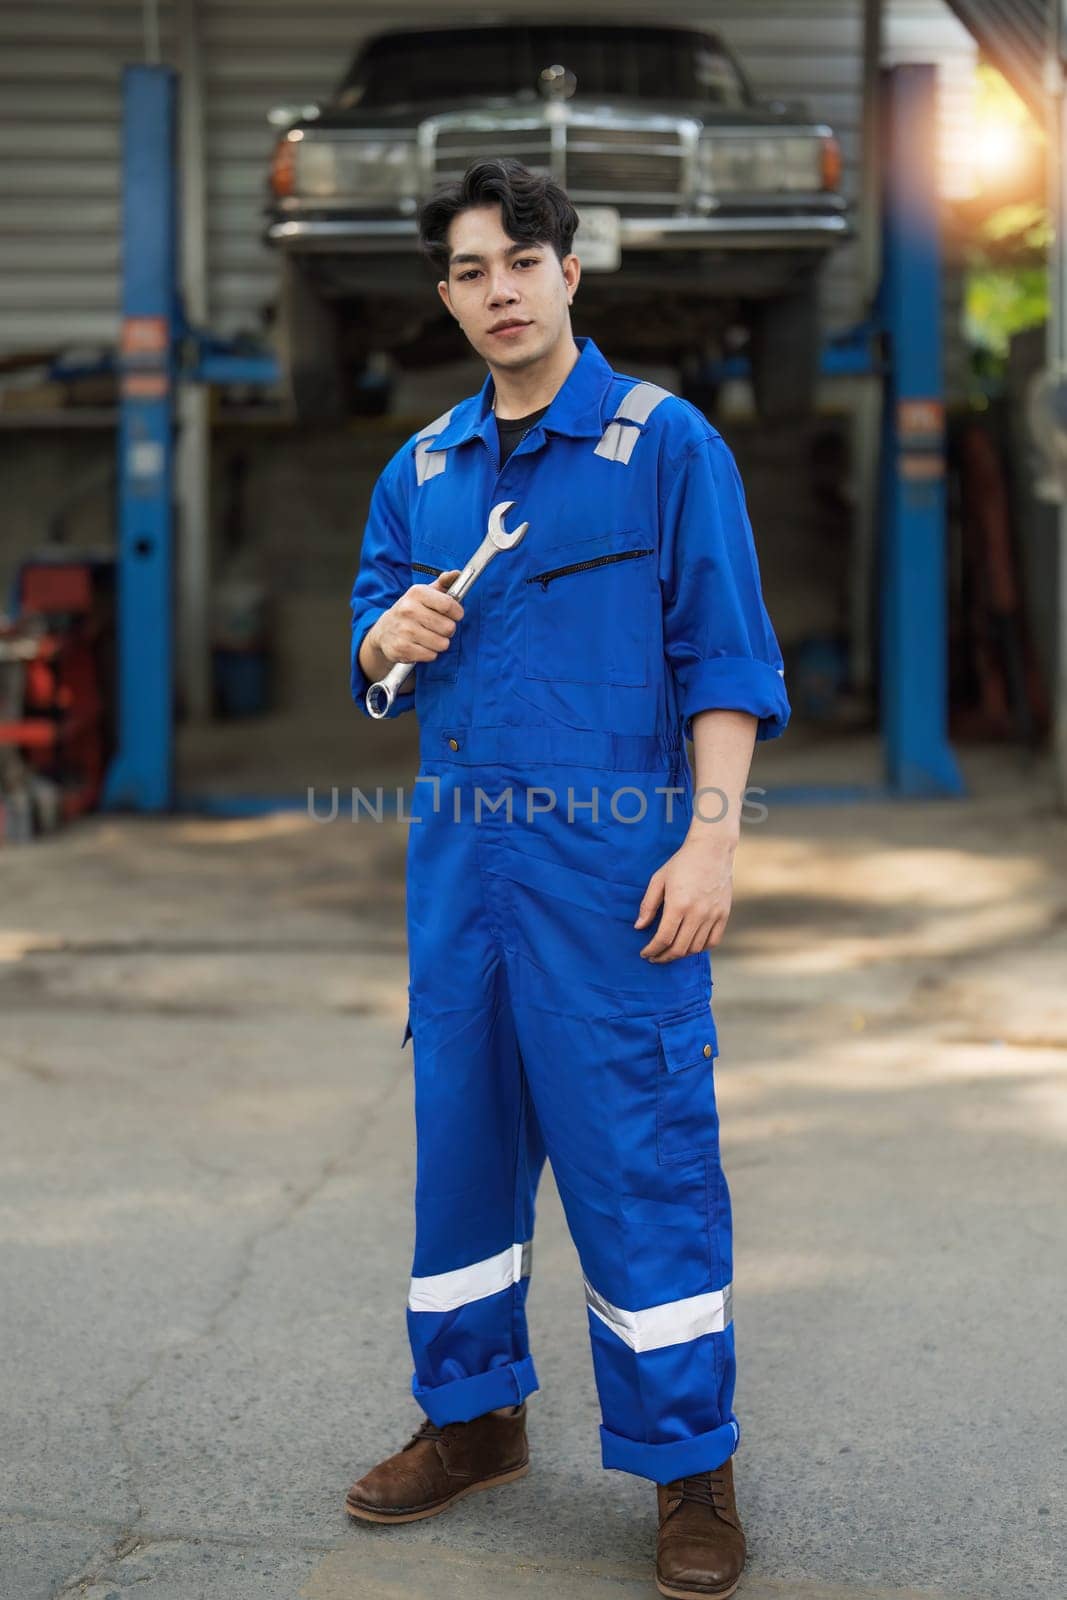 Portrait Shot of a Handsome Mechanic Working on a Vehicle in a Car Service. Professional Repairman is Wearing Gloves and Using a Ratchet Underneath the Car. Modern Clean Workshop...